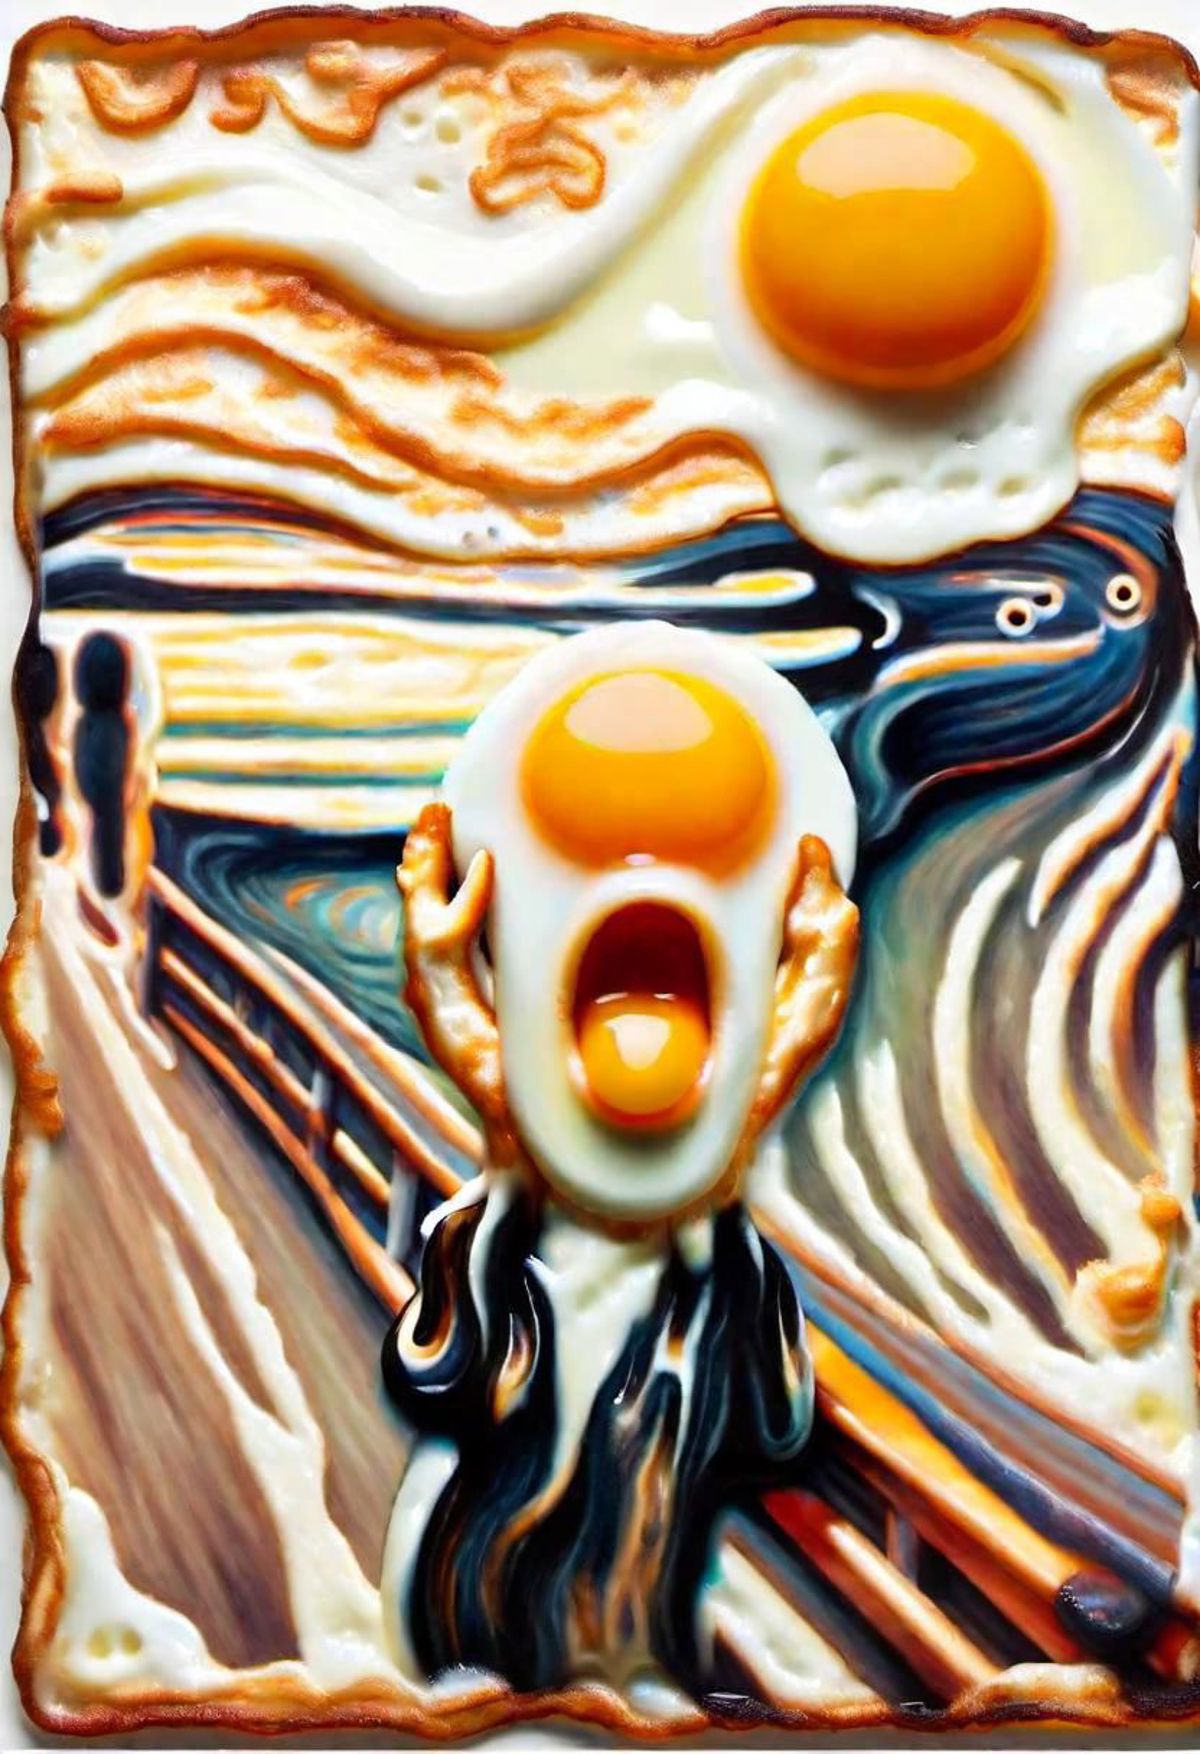 A piece of cake made to look like a screaming face with two eggs for eyes, a mouth, and a person with an open mouth.